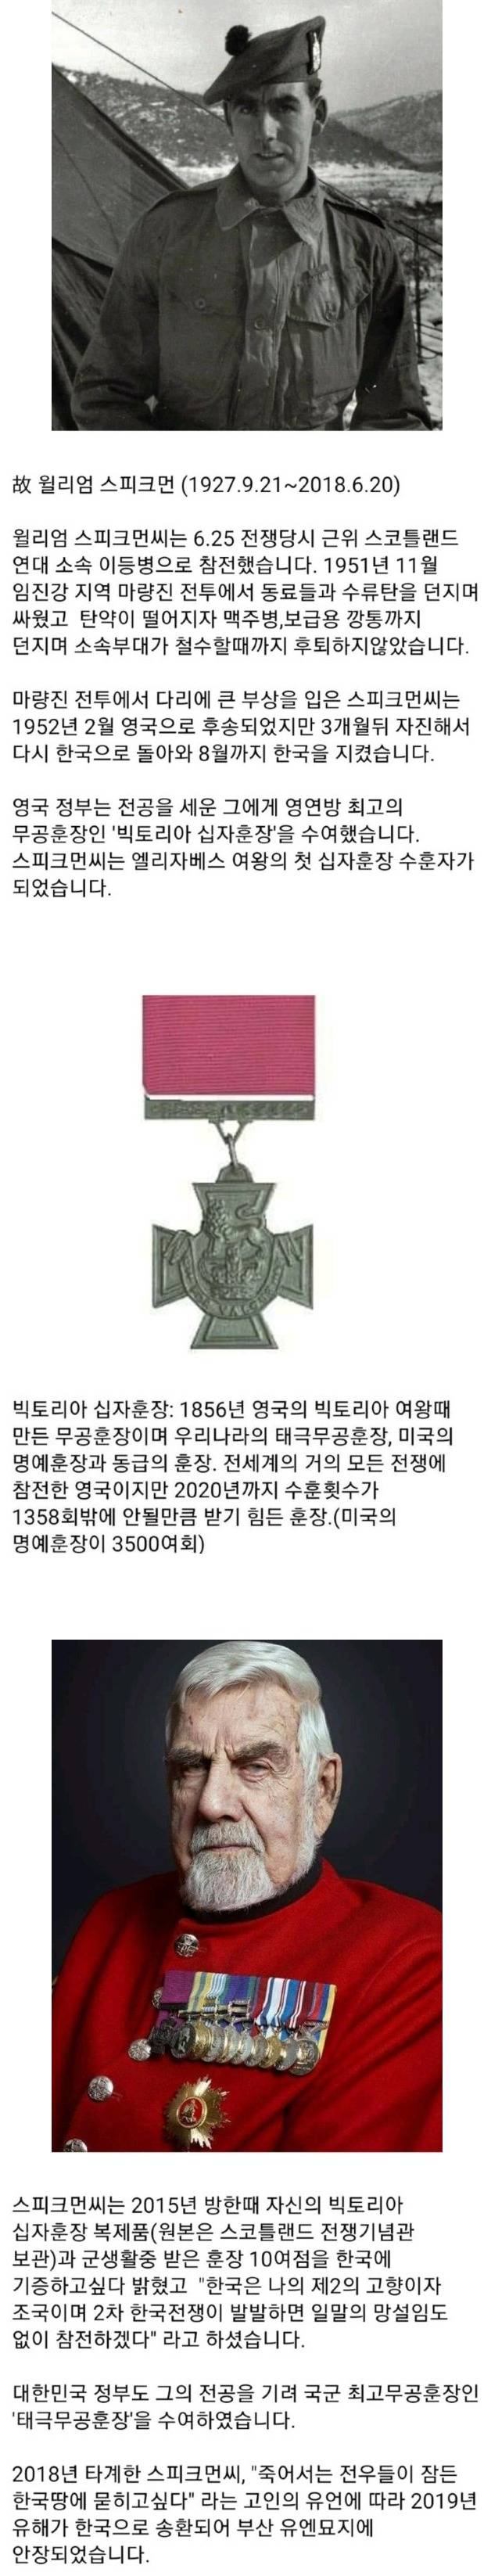 Soldiers awarded the highest medal of military service in the United Kingdom and South Korea.